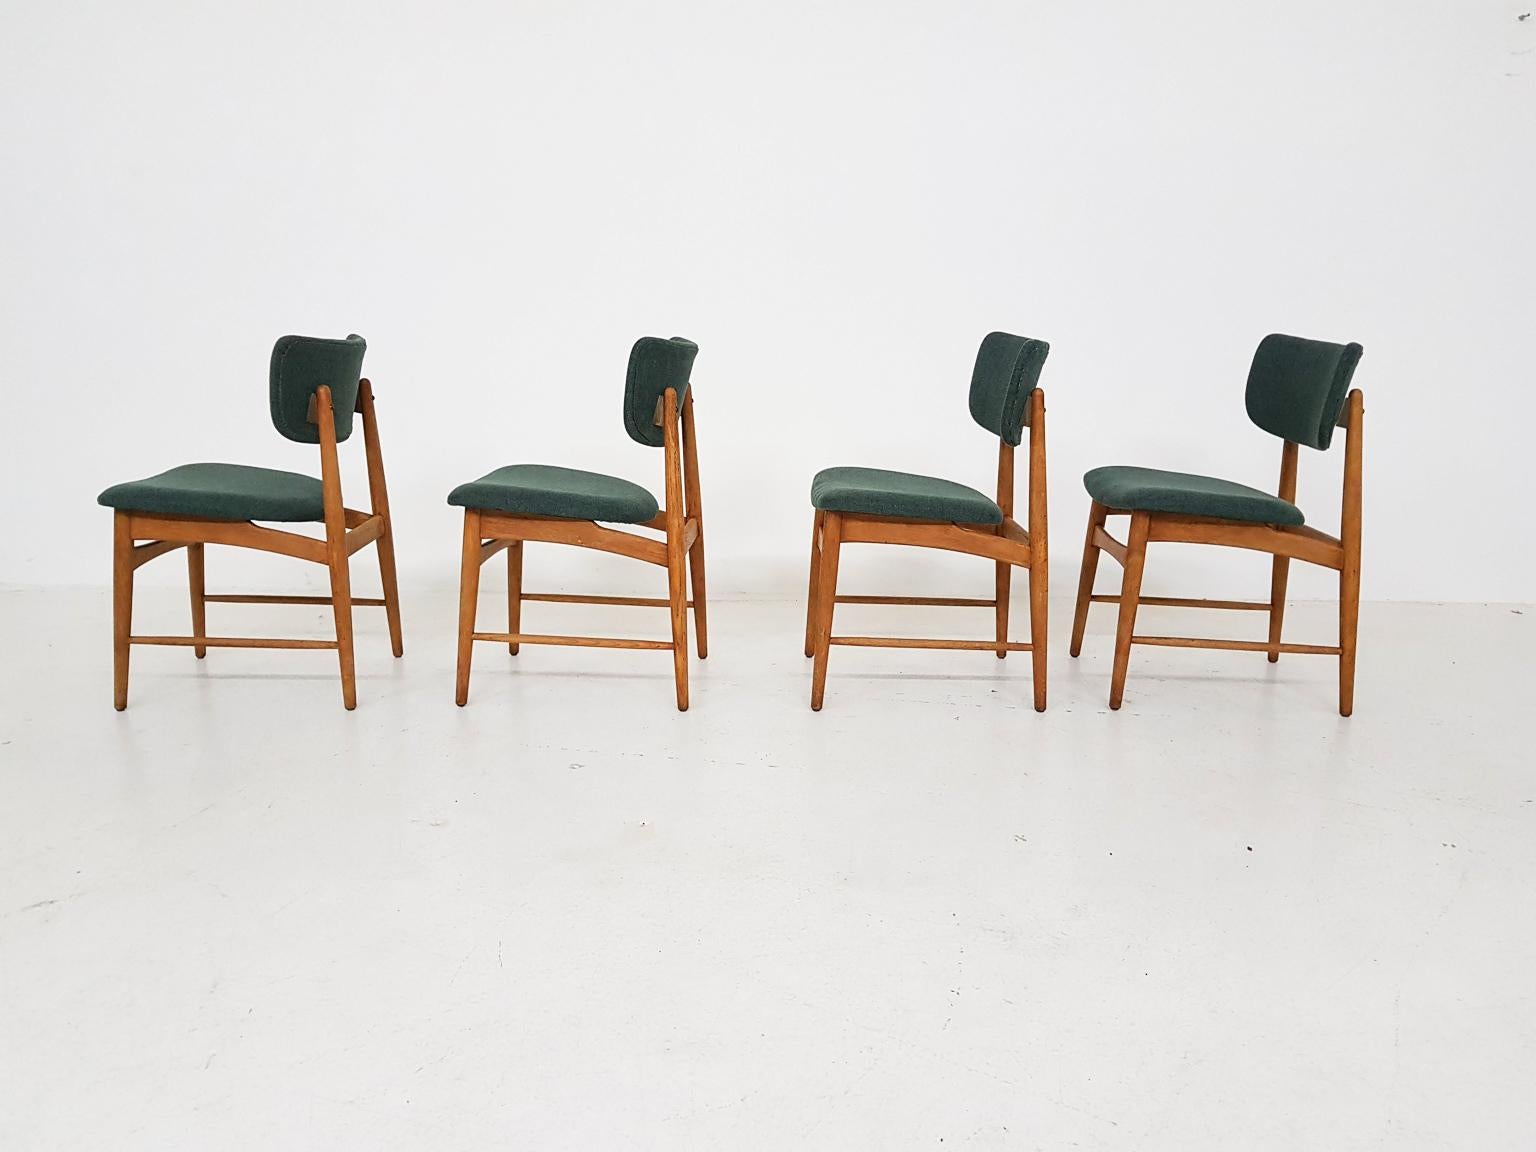 Scandinavian Modern Set of 4 Oak Dining Room Chairs Attributed to Bovenkamp, The Netherlands, 1960s For Sale